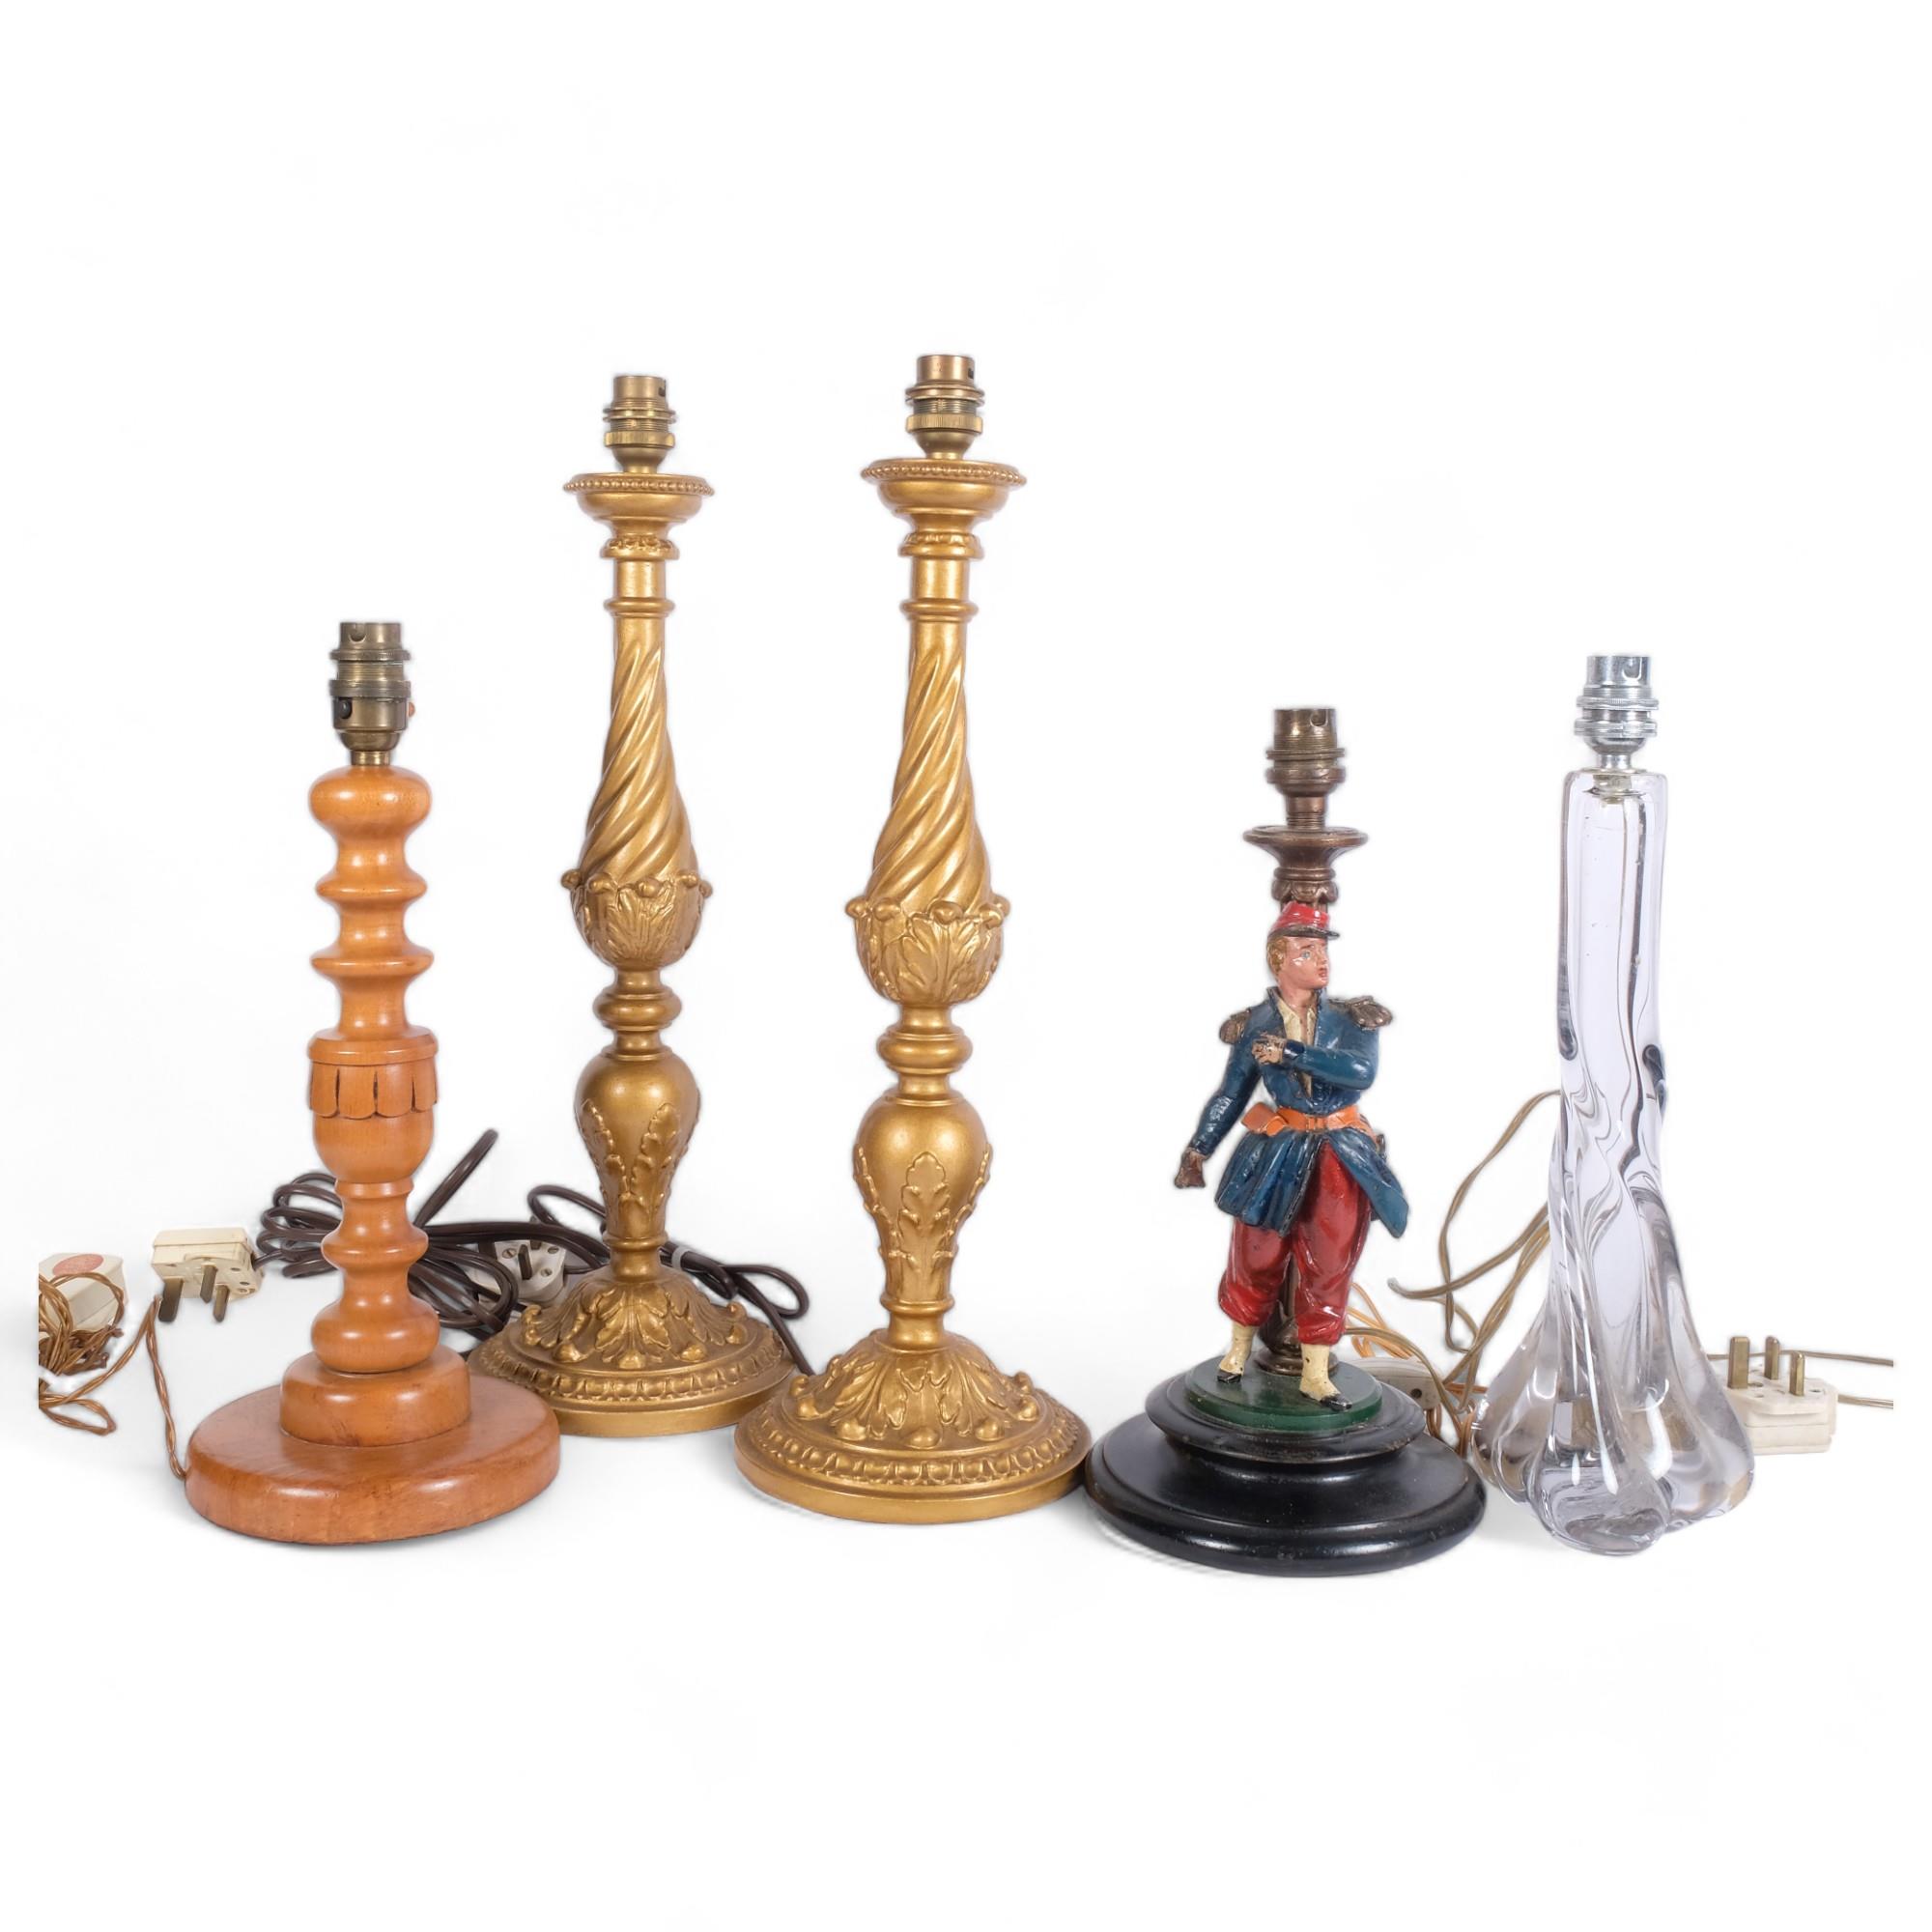 Vintage wooden table lamp supported by painted metal figure, H31cm, a pair of gilded lamps, and 2